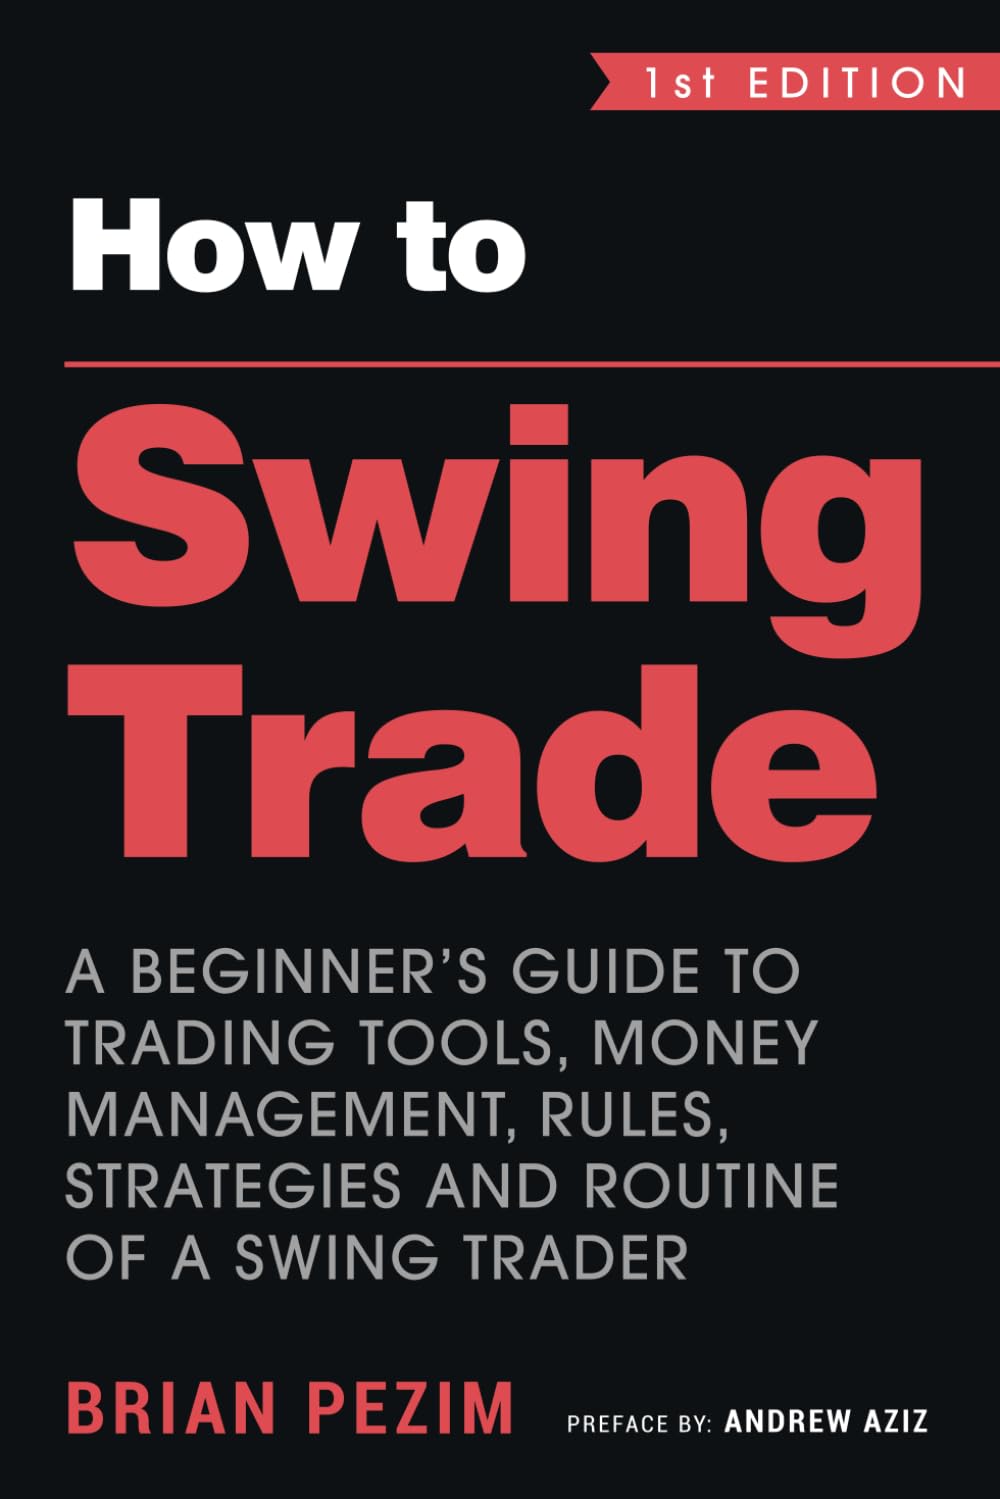 How To Swing Trade Paperback by Andrew Aziz (Preface), Brian Pezim (Author)